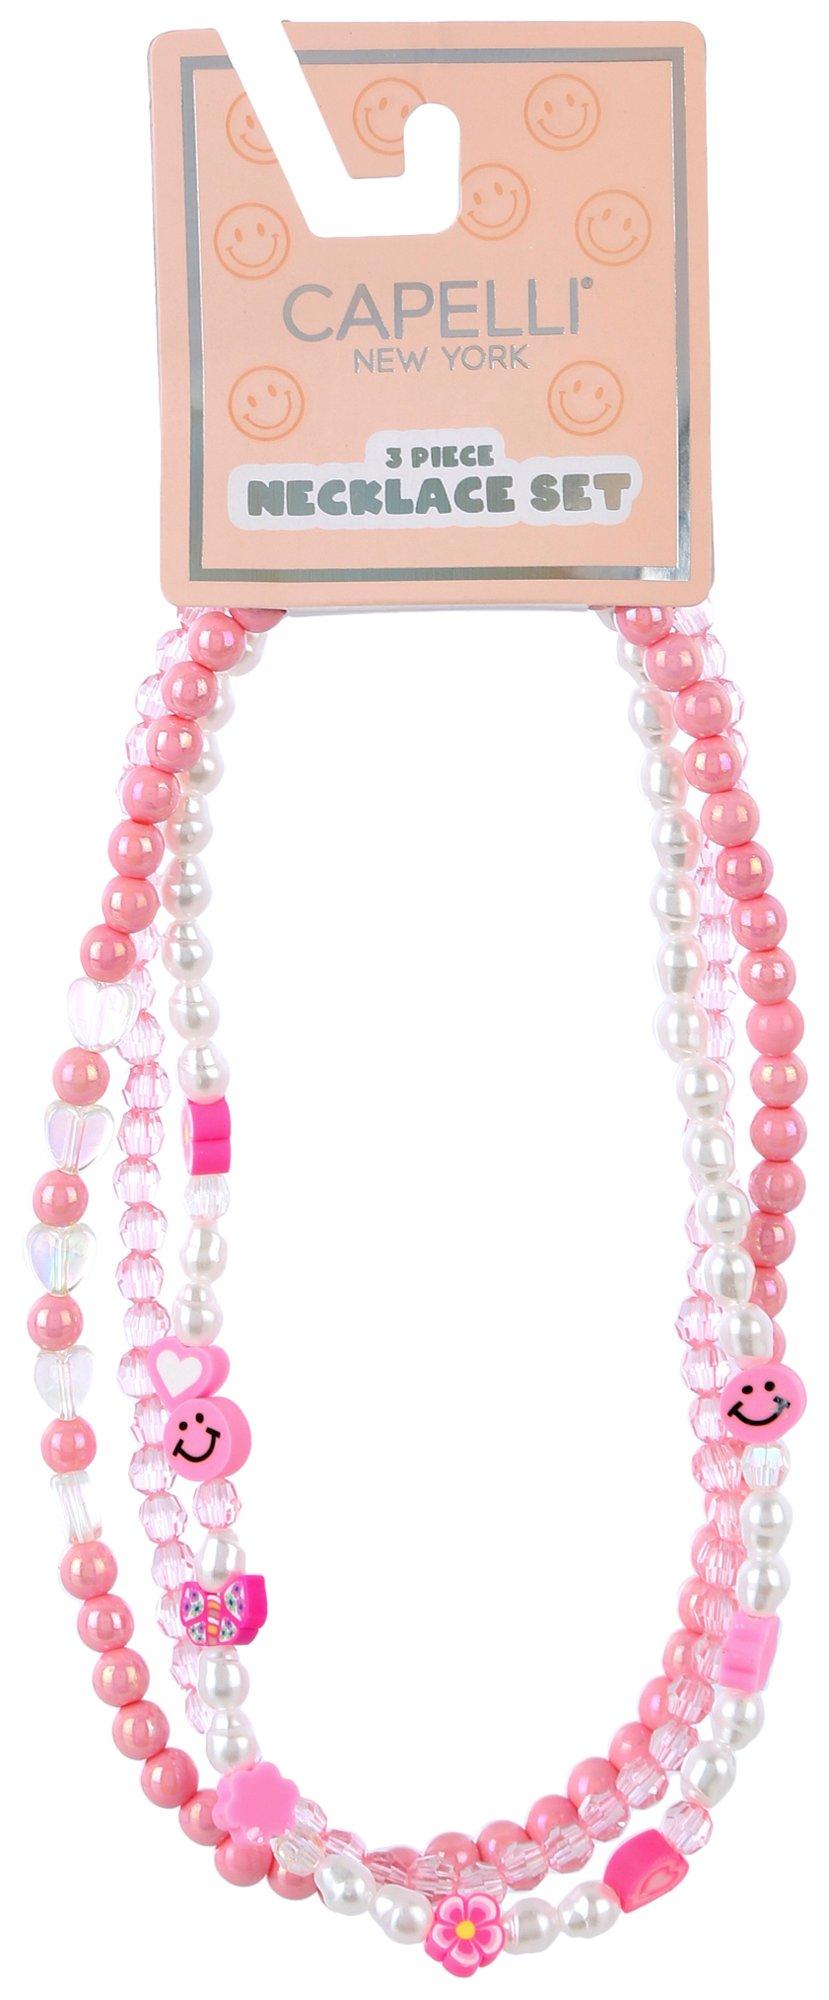 Capelli NY Girls 3pk. Necklace Collection Set